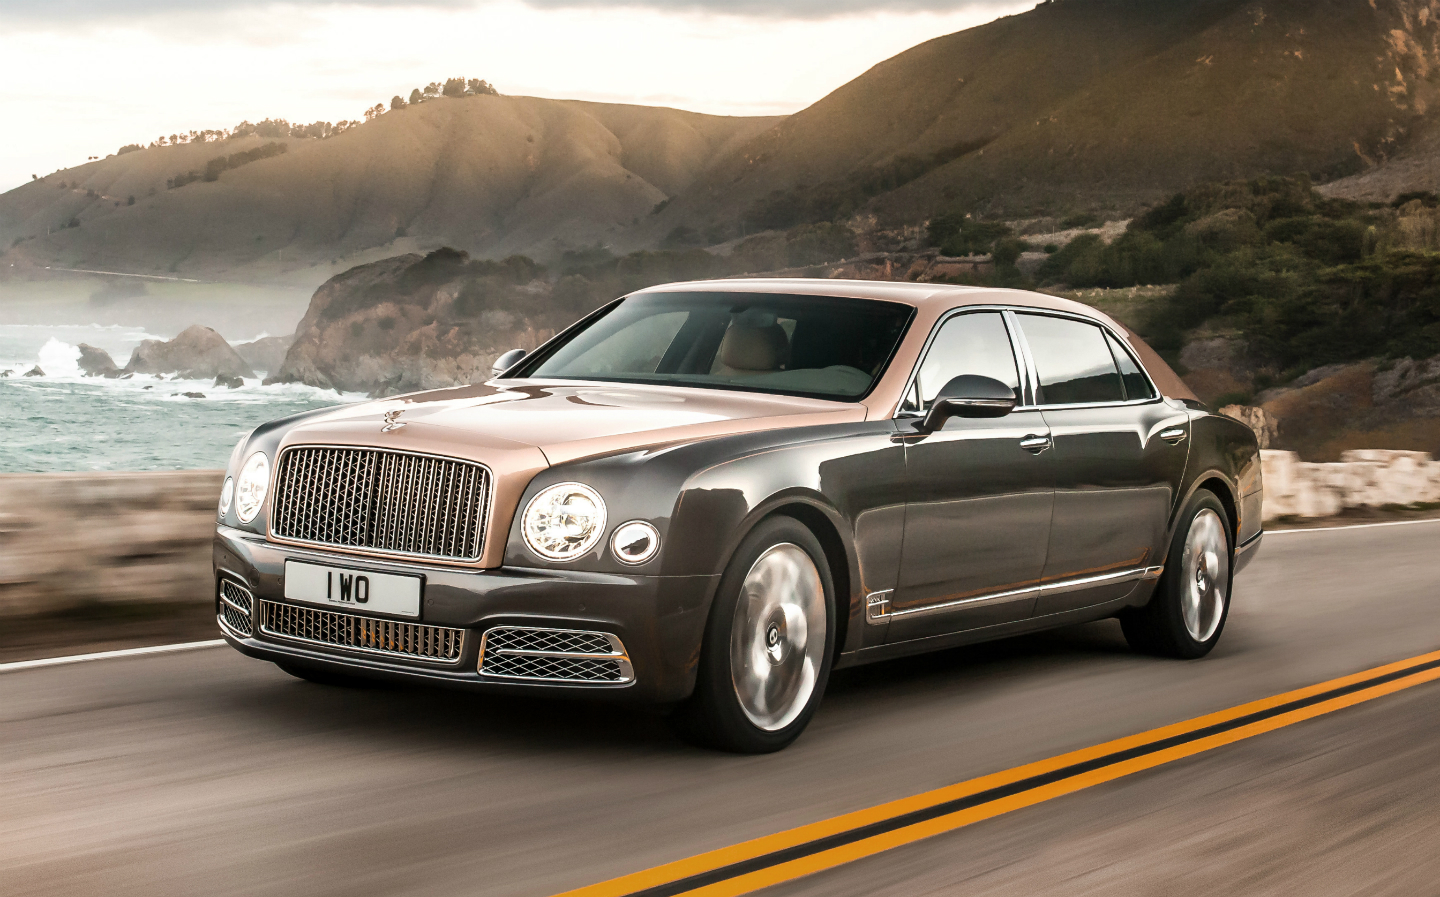 Clarkson: the Bentley Mulsanne is epic in more ways than one